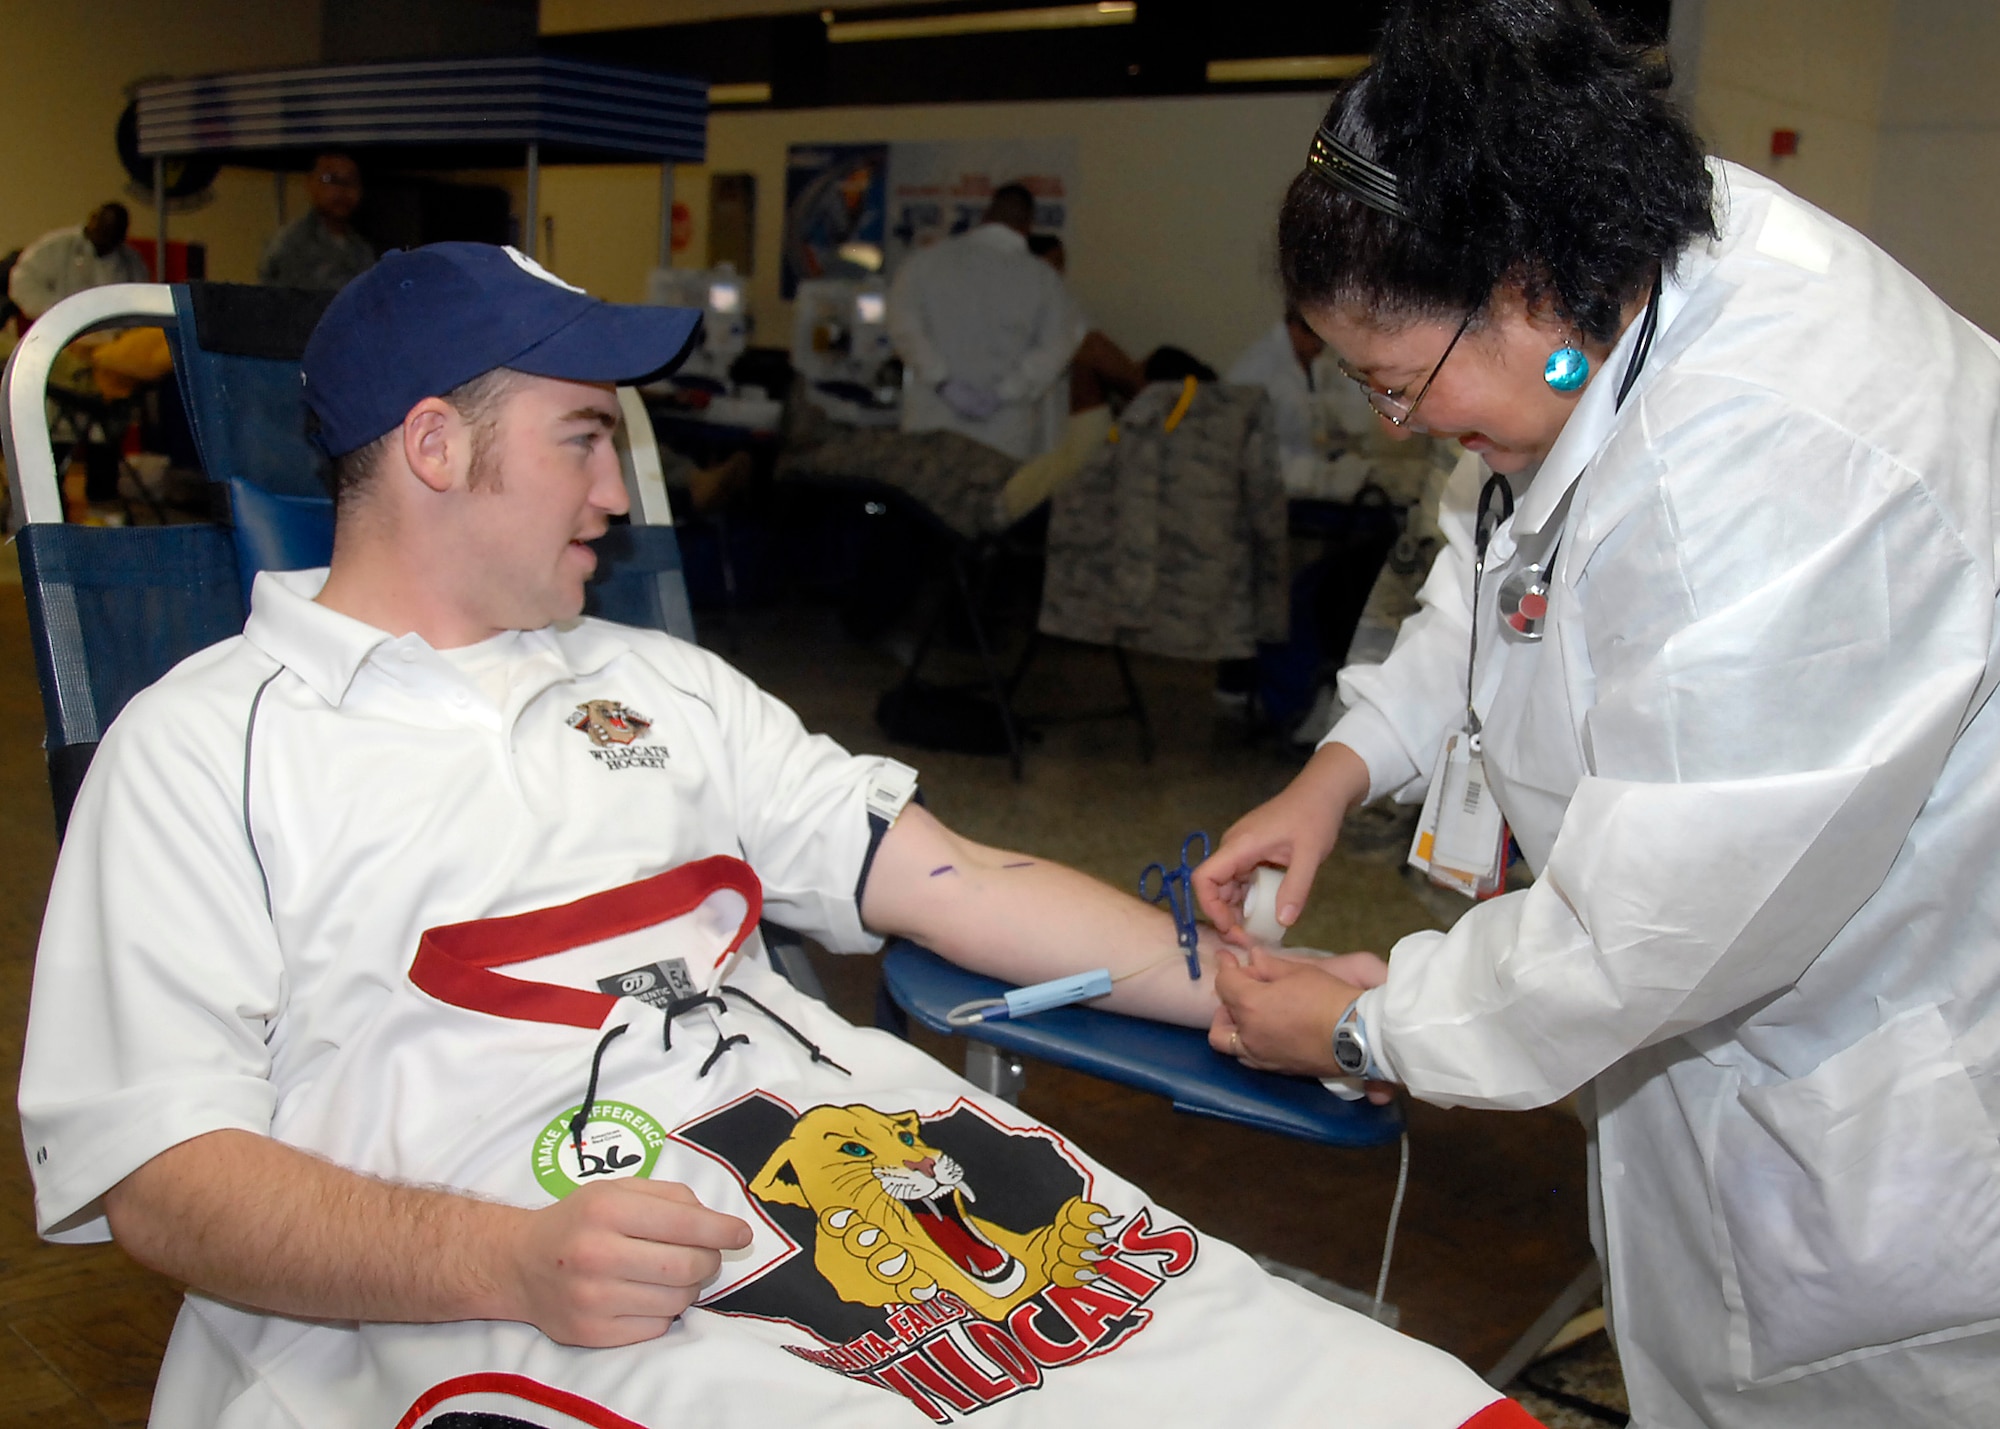 Sean McKenzie, a member of the Wichita Falls, TX Wildcats Hockey Team, donates blood at the American Red Cross Drive Sept. 22 at the Airman’s Club. This blood drive was geared to break a state blood donation record. (U.S. Air Force photo/ Mike Litteken)